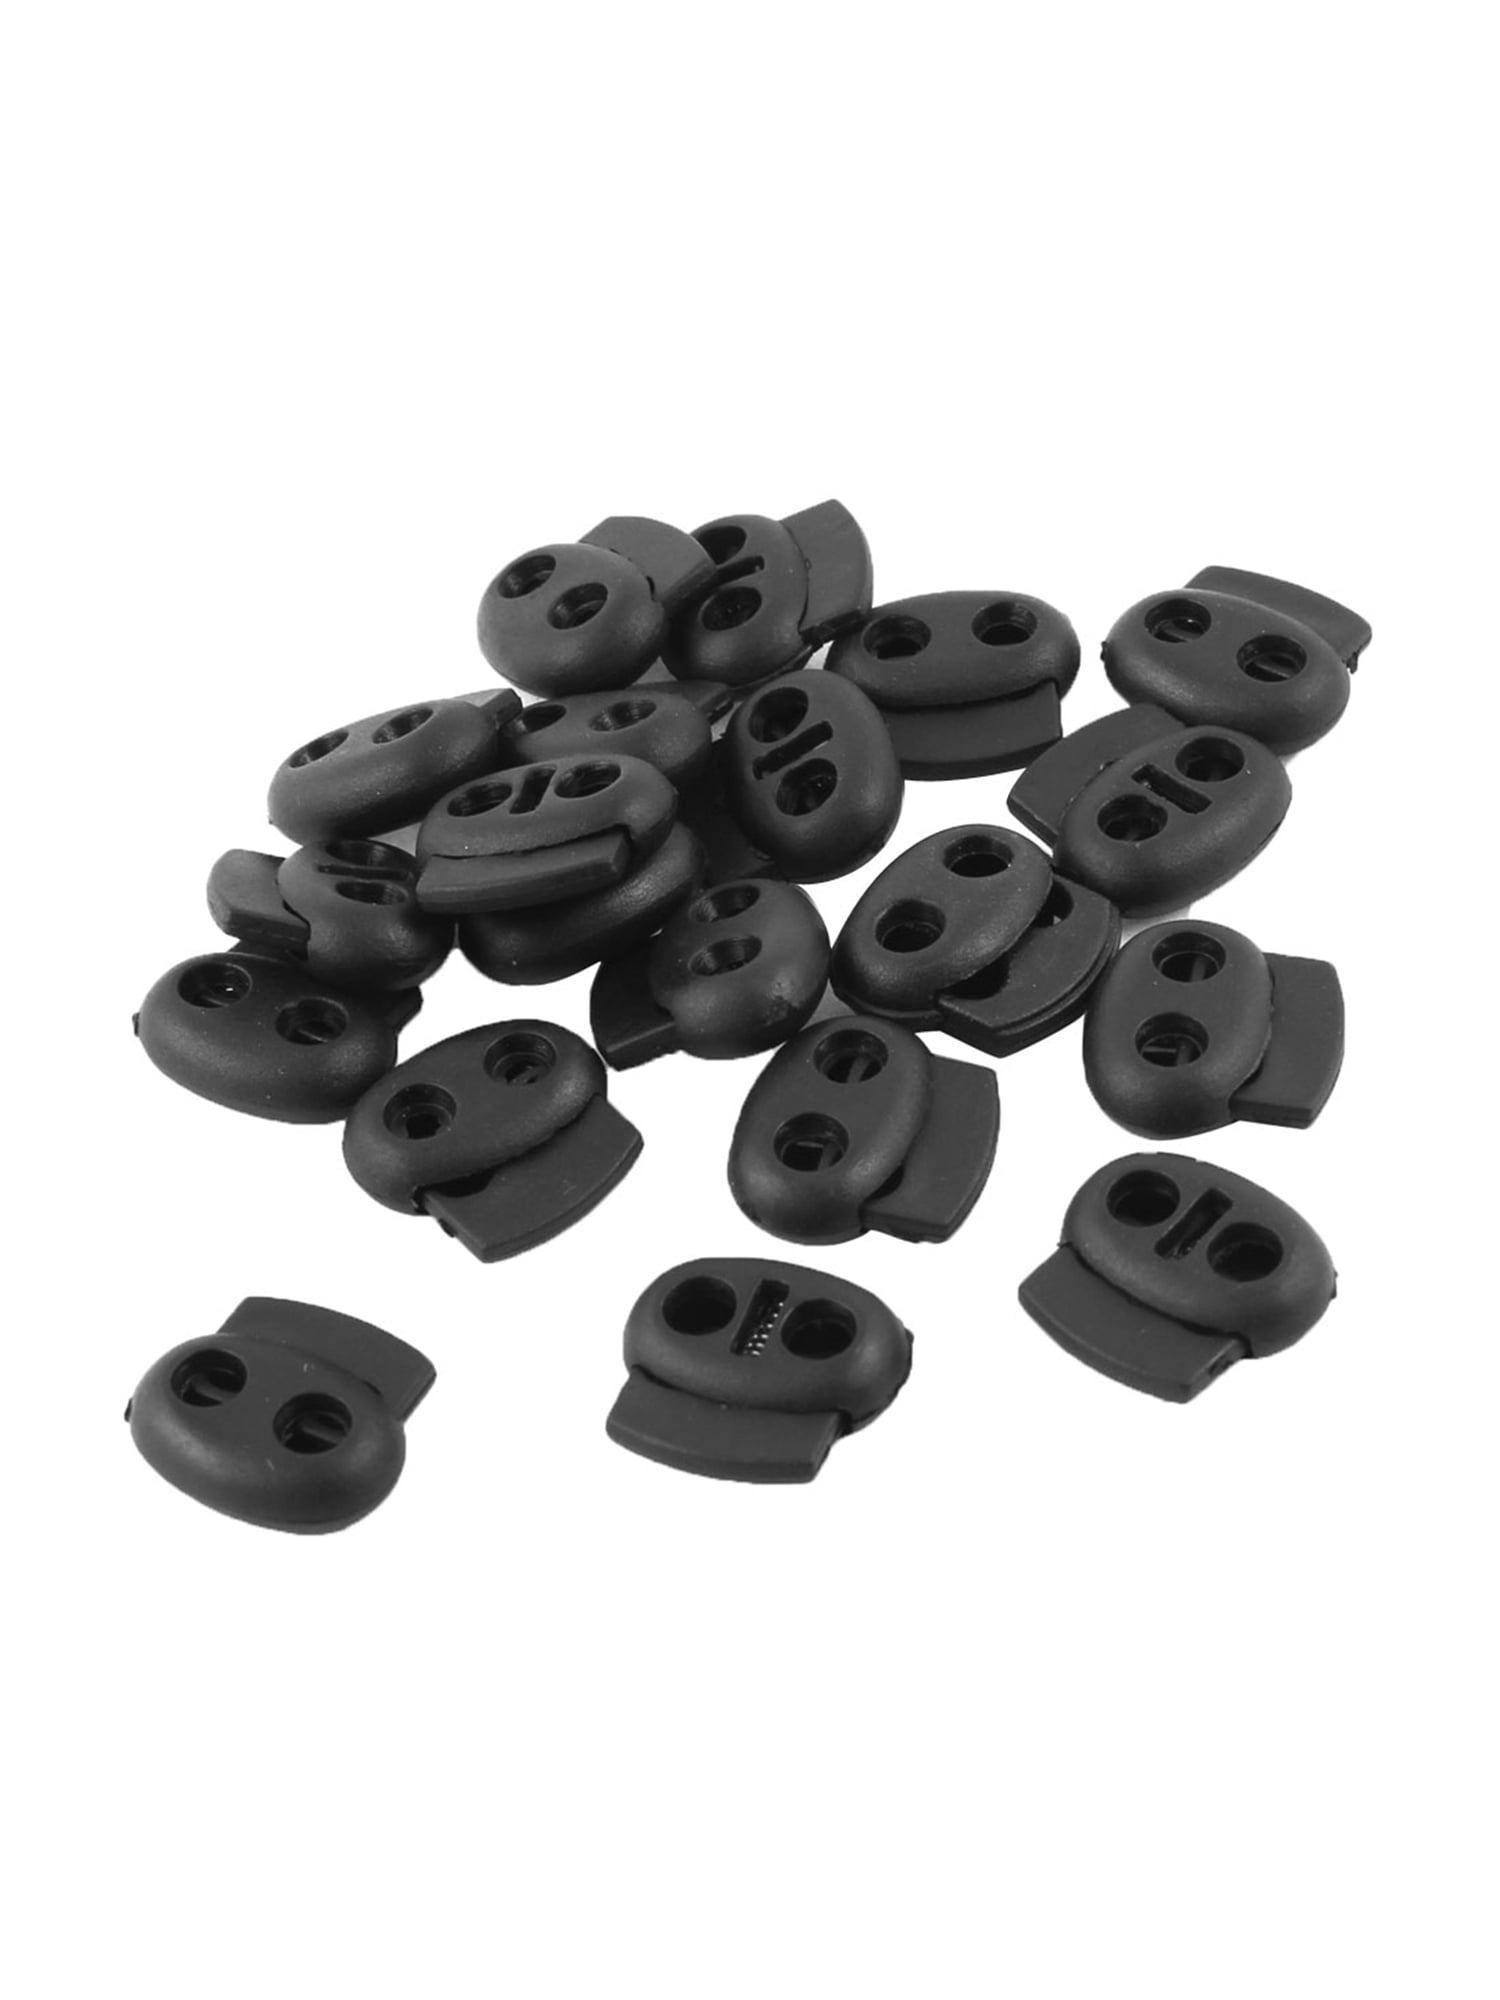 30 PCS Heavy Duty Double Hole Cord Locks for Drawstring, Spring Toggle  Stoppers for No Tie Shoelaces Paracord Hoodies Pants